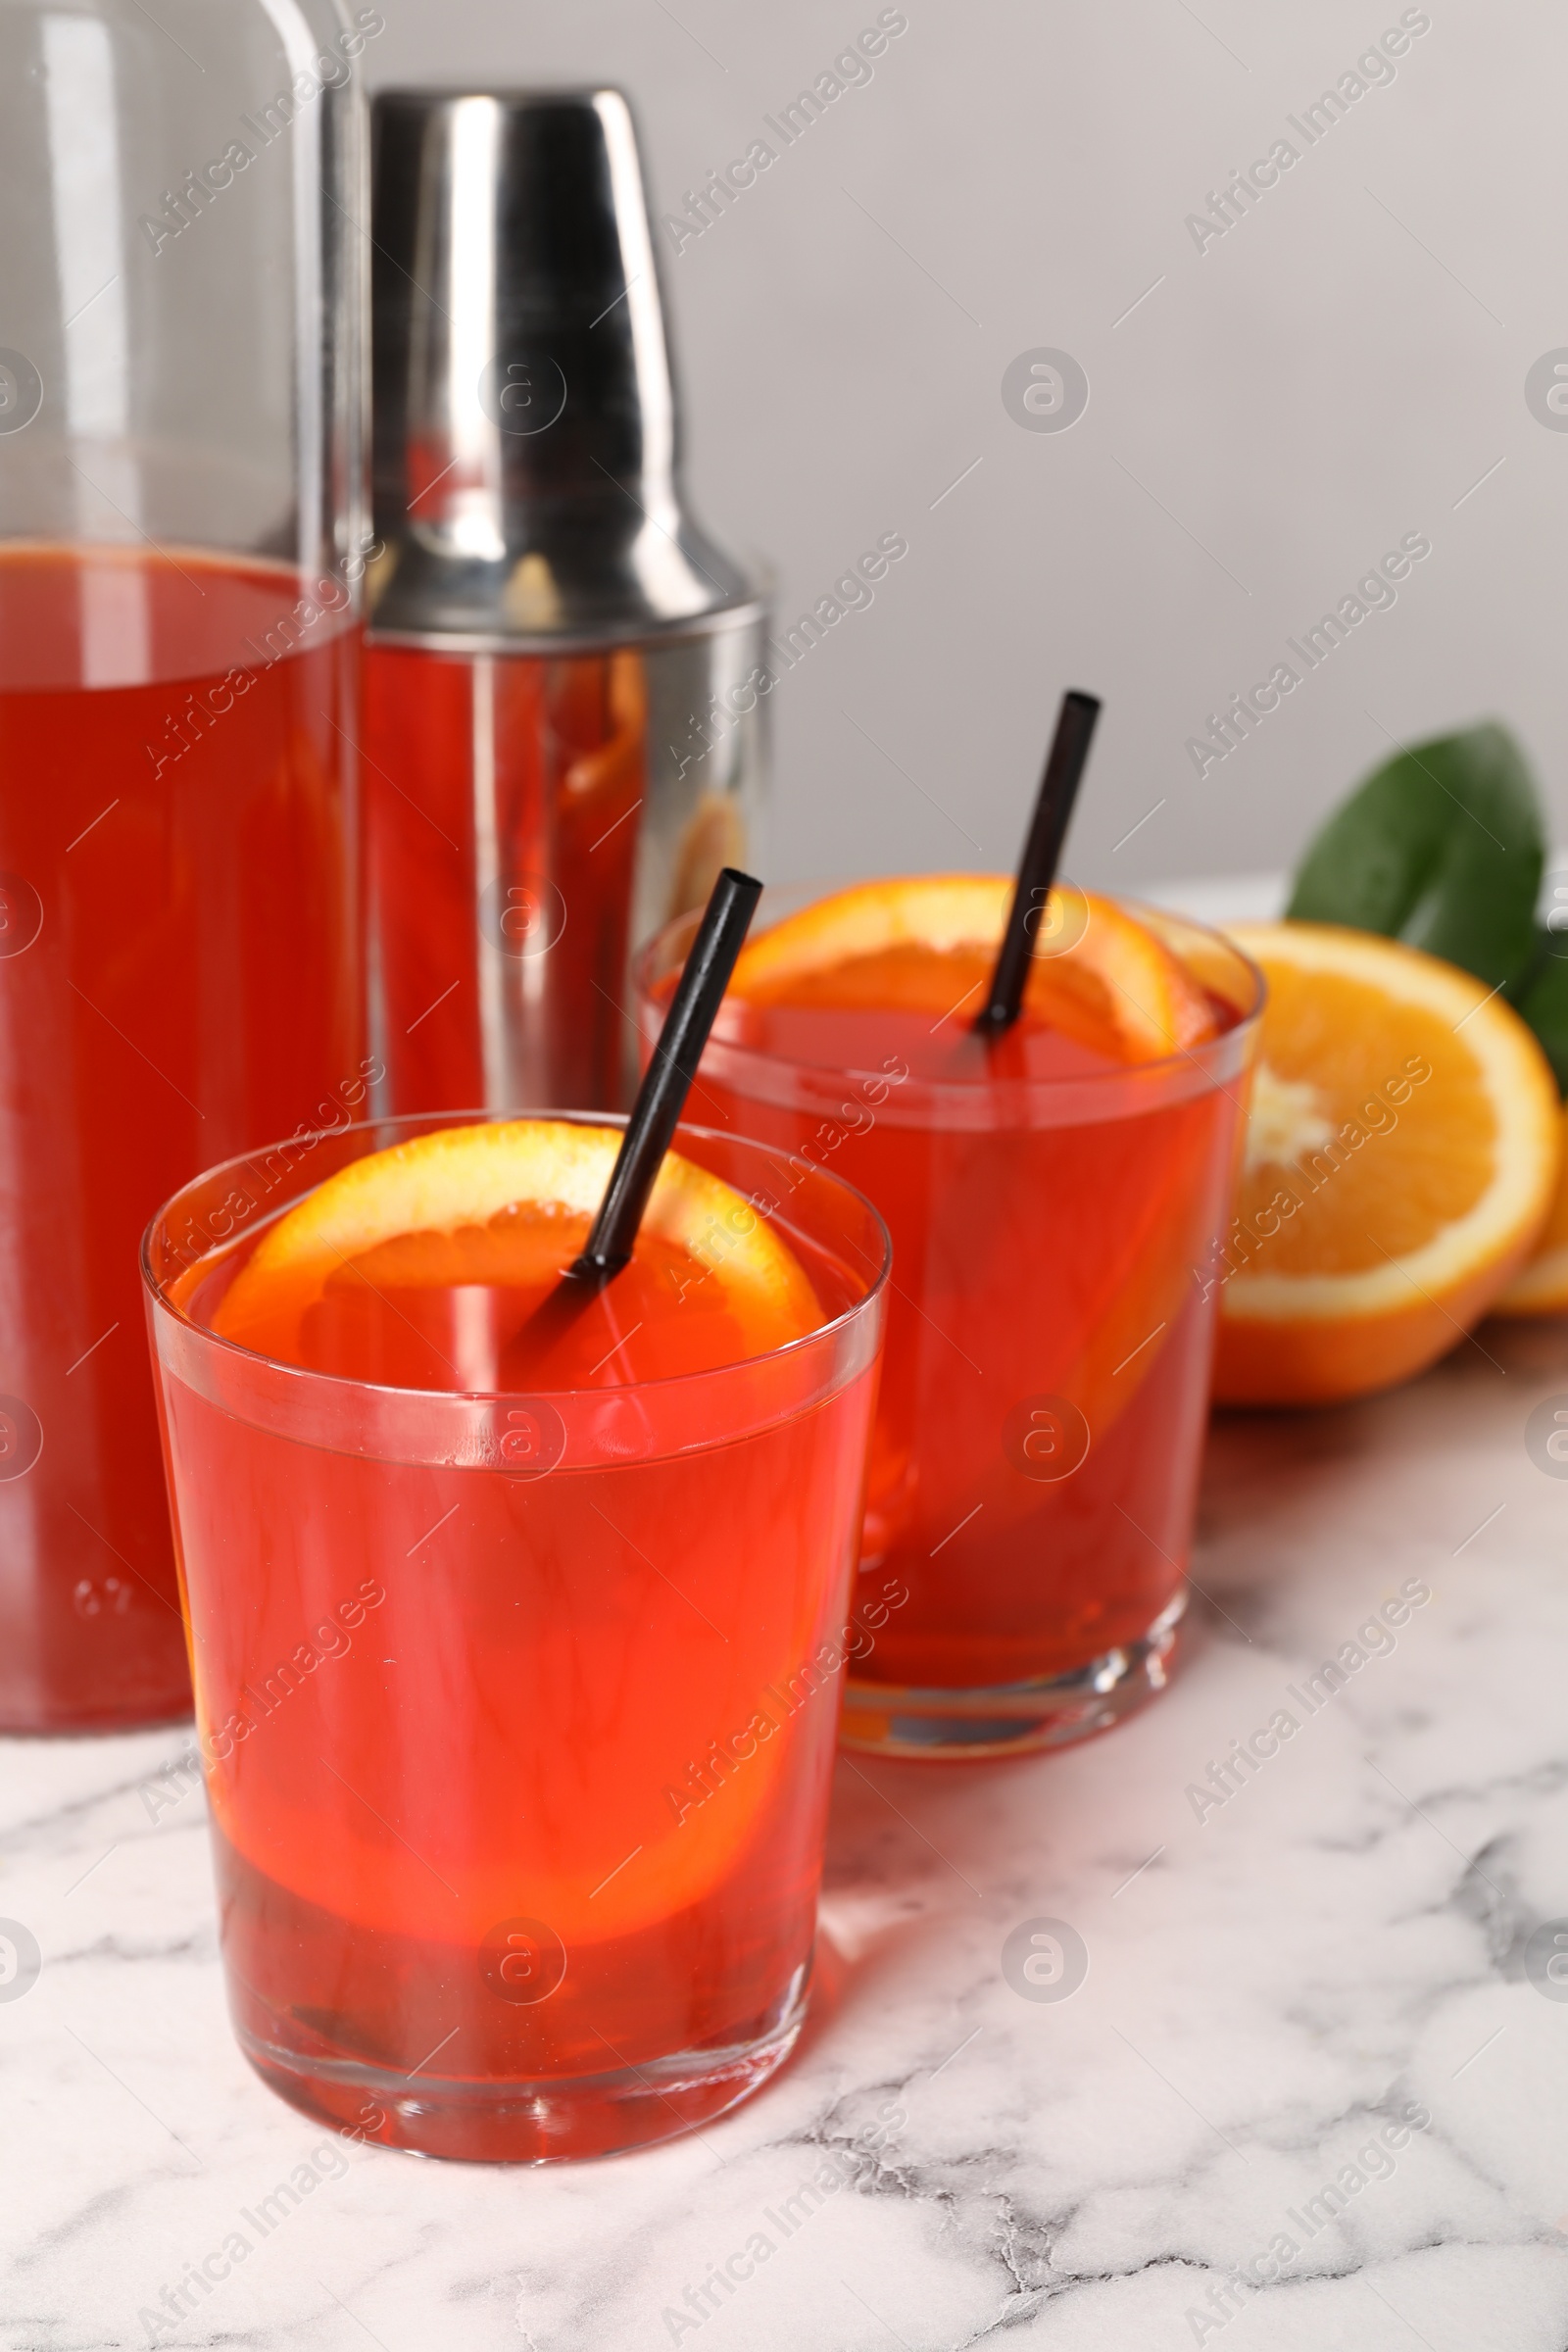 Photo of Aperol spritz cocktail, orange slices and straws in glasses on white marble table, closeup